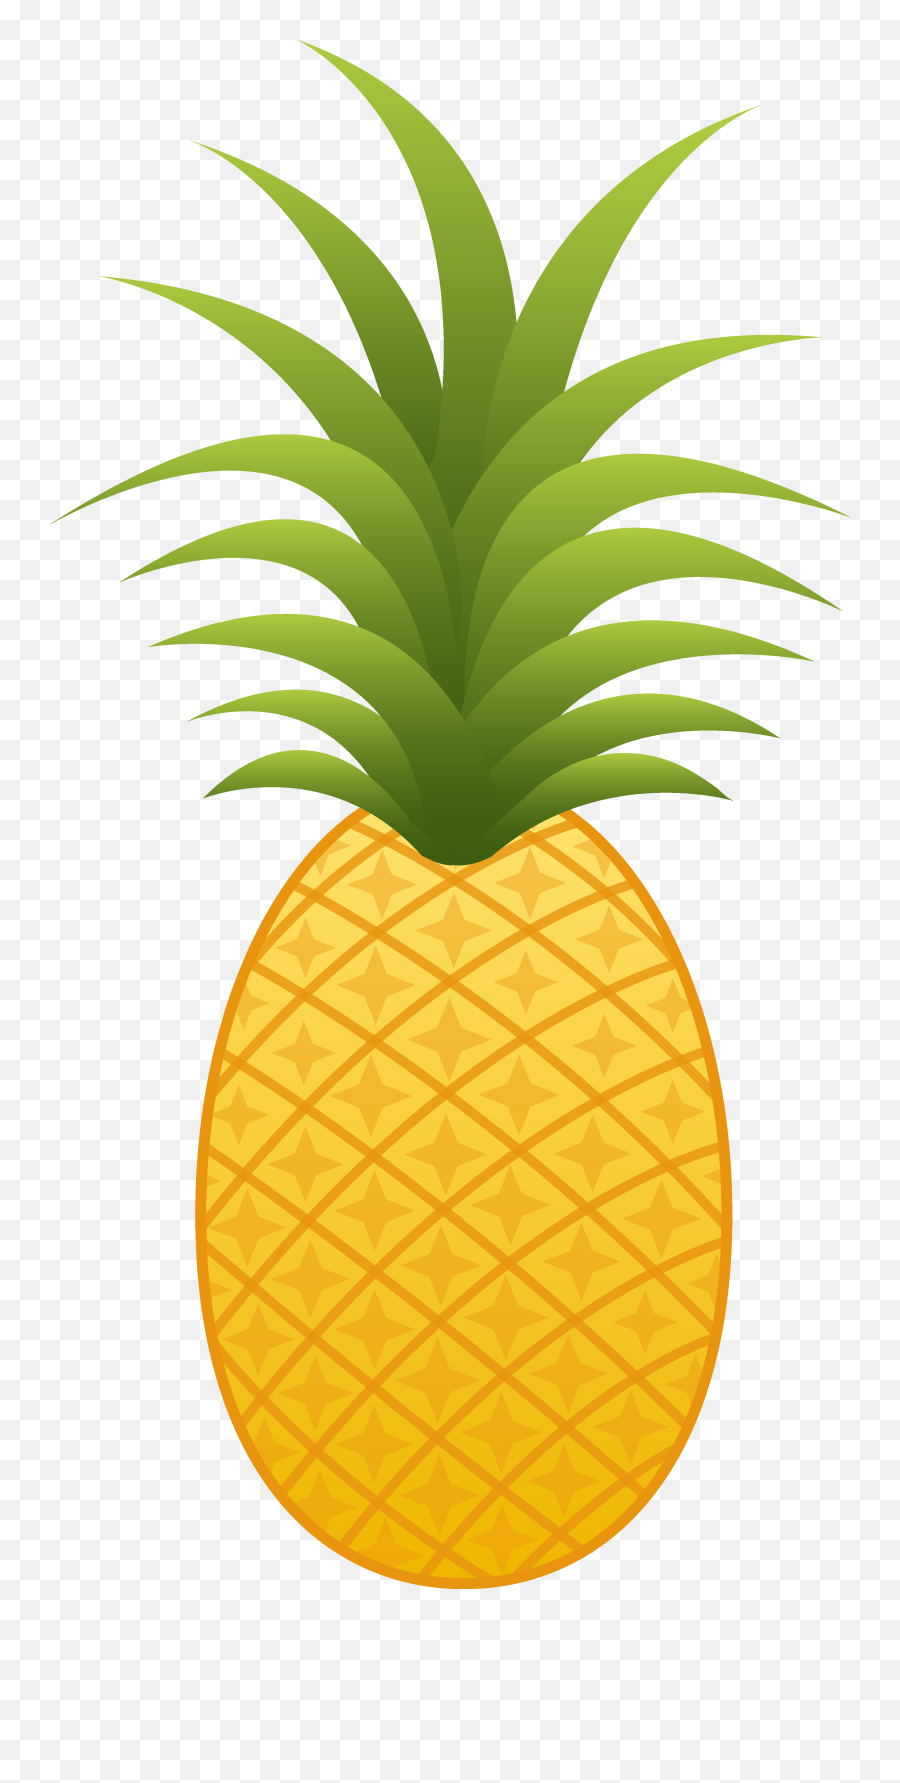 Pinapple Clipart Png Image - Purepng Free Transparent Cc0 Pineapple Clipart Transparent Background,Pen Clipart Png